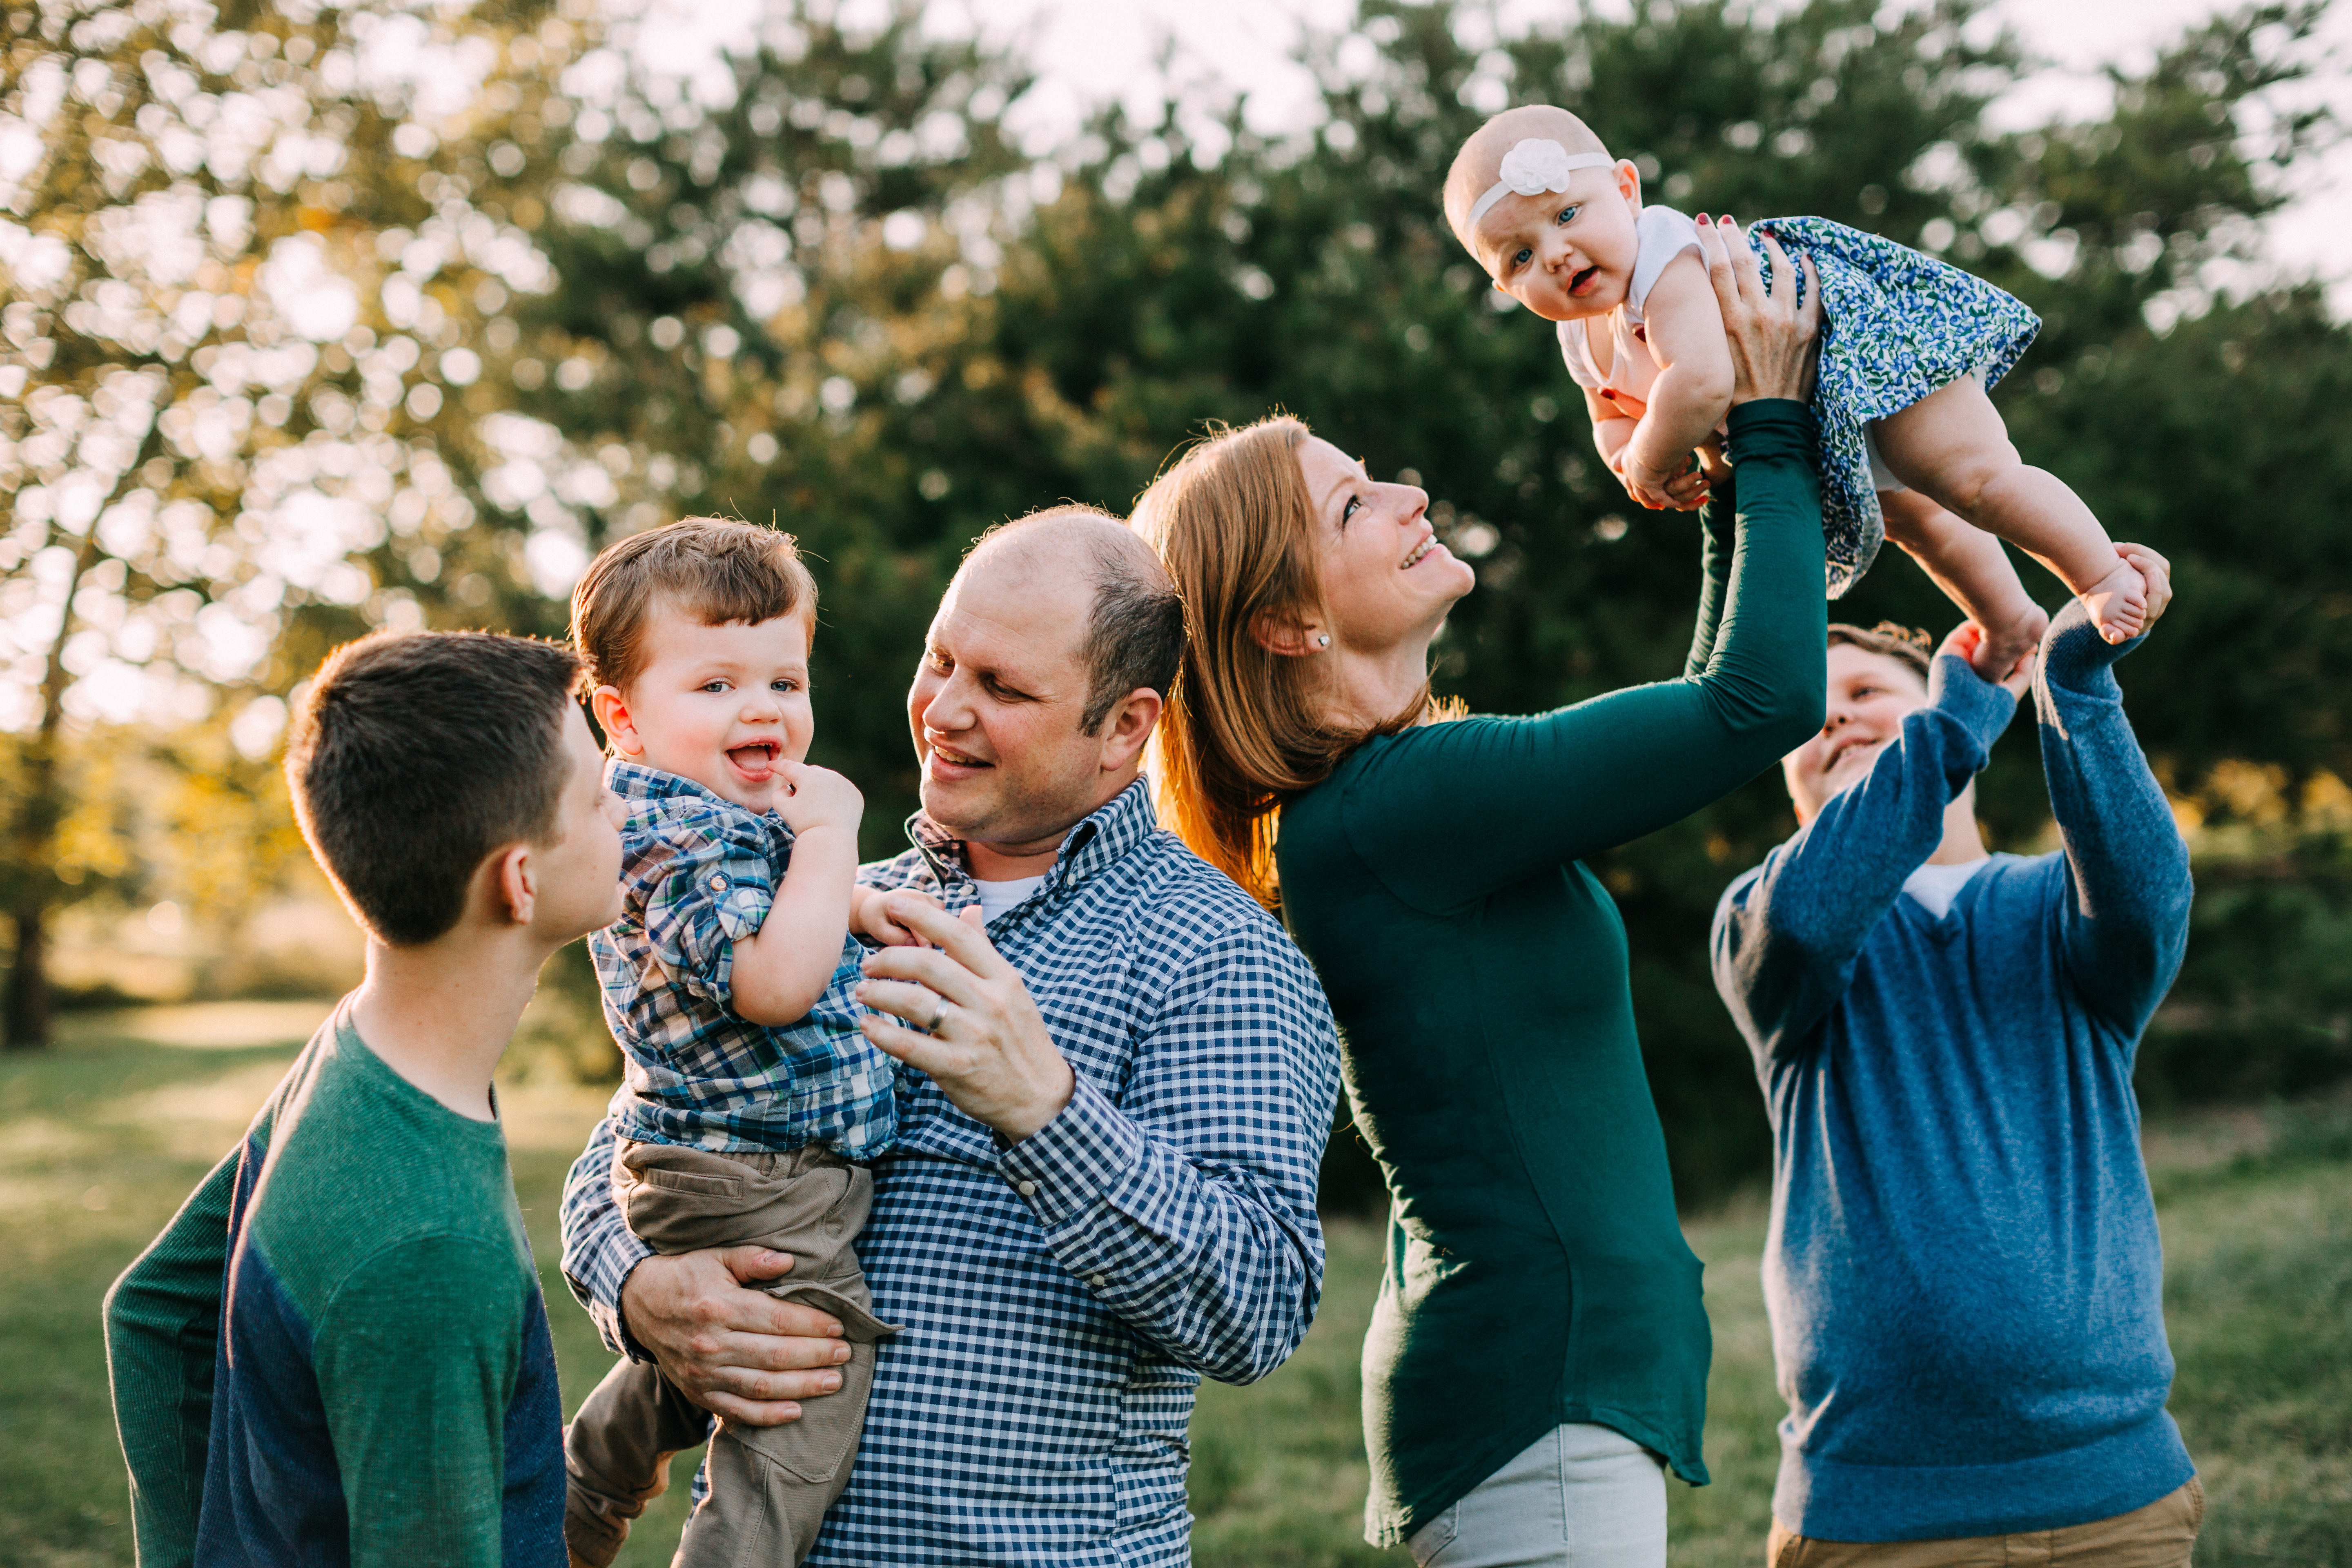 photo session, st louis family photographer, forest park family session, family of 6, toddler boy, baby girl, blues and greens family outfits, fall family session, st louis baby photographer, st louis child photographer